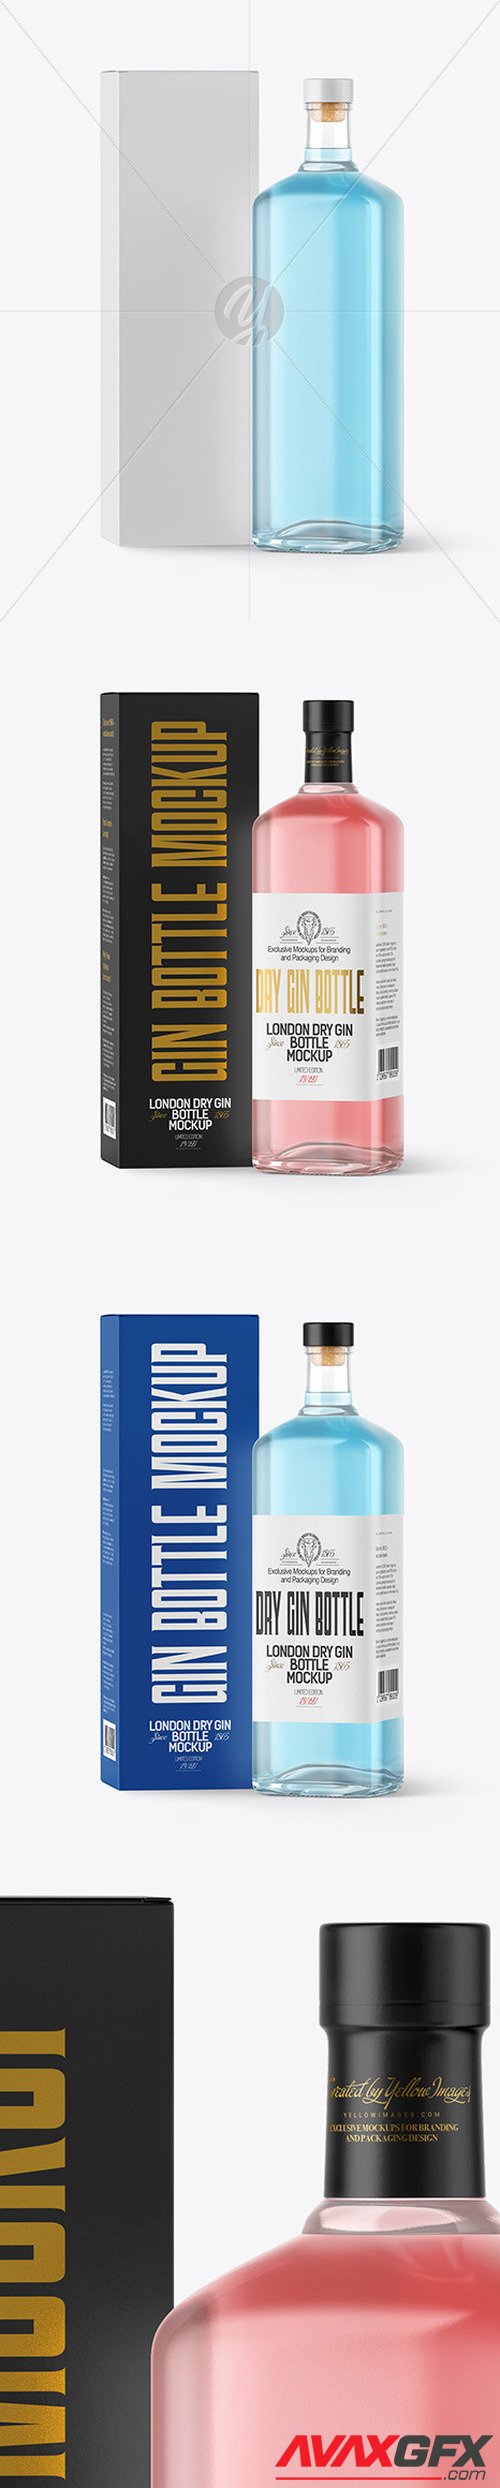 Gin Bottle with Box Mockup 53586 TIF